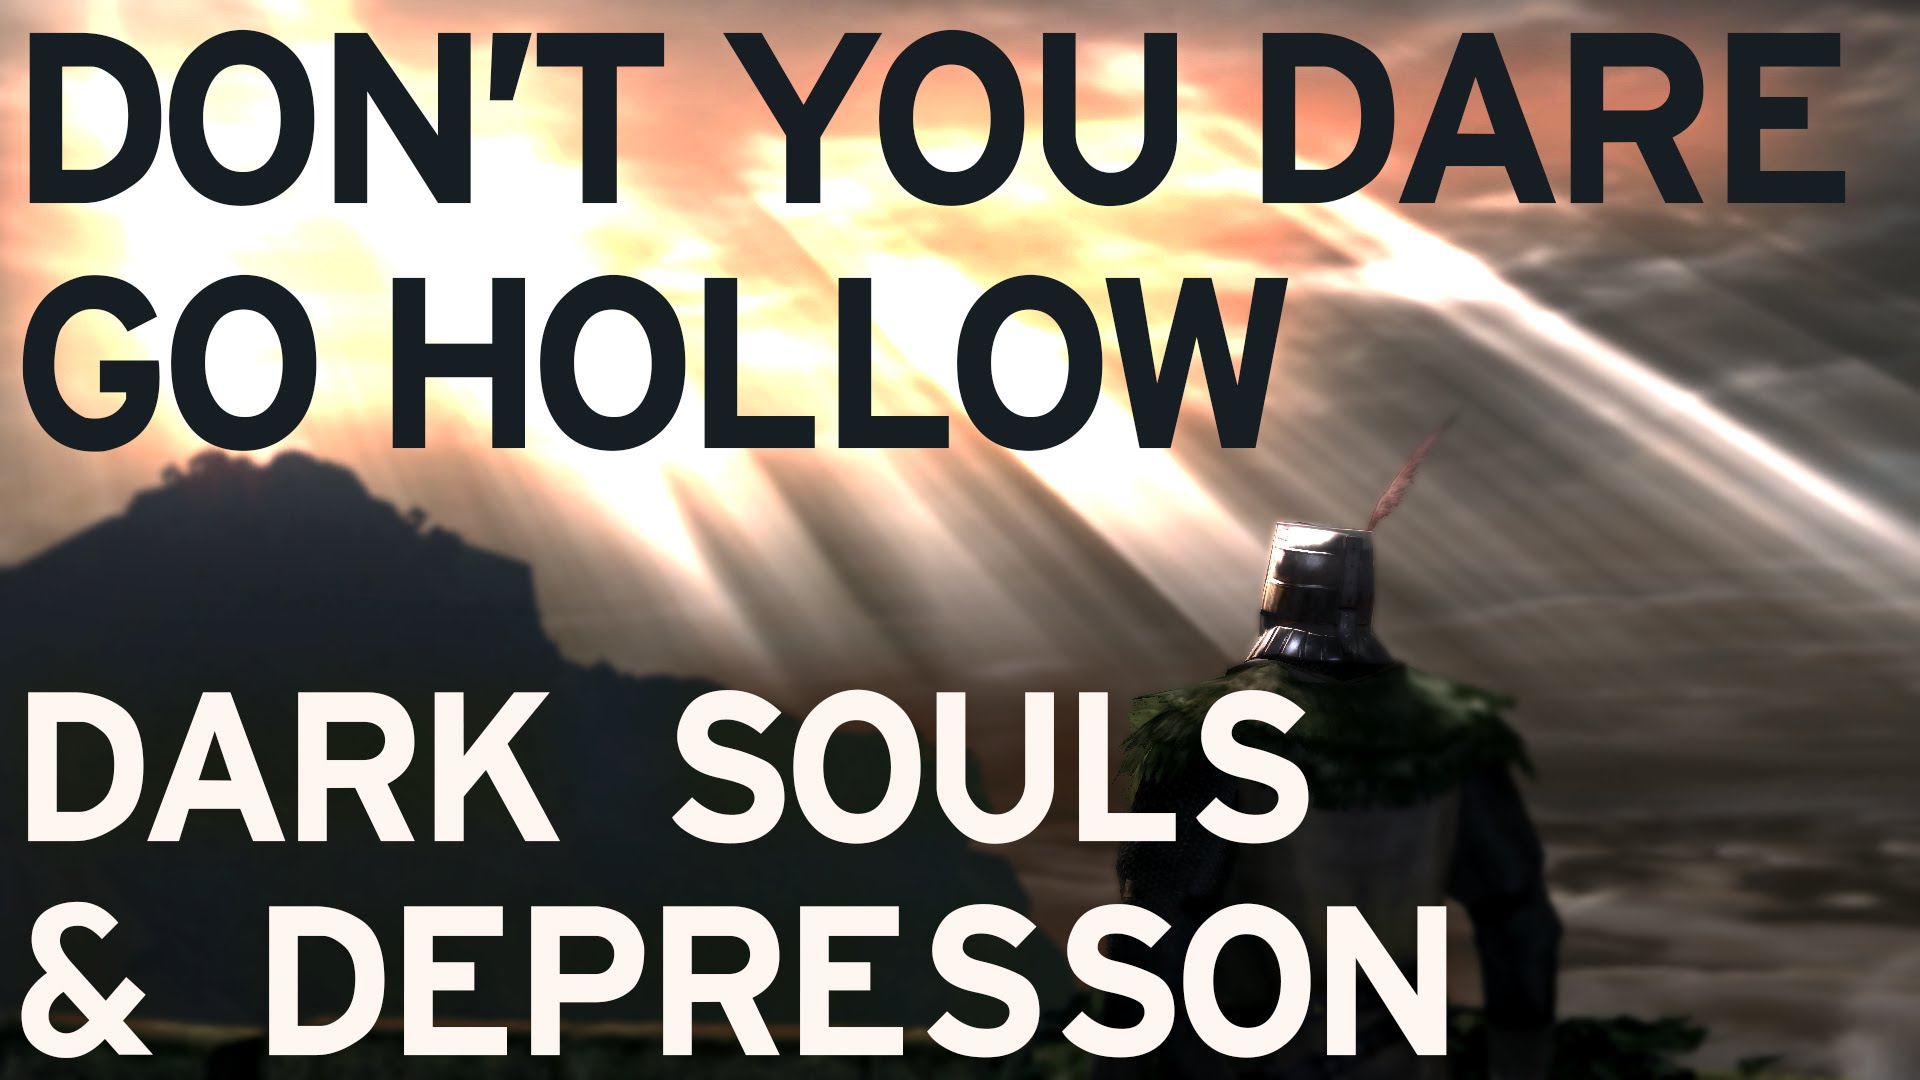 #VIDEO: Don't You Dare Go Hollow - Dark Souls As An Allegory For D...